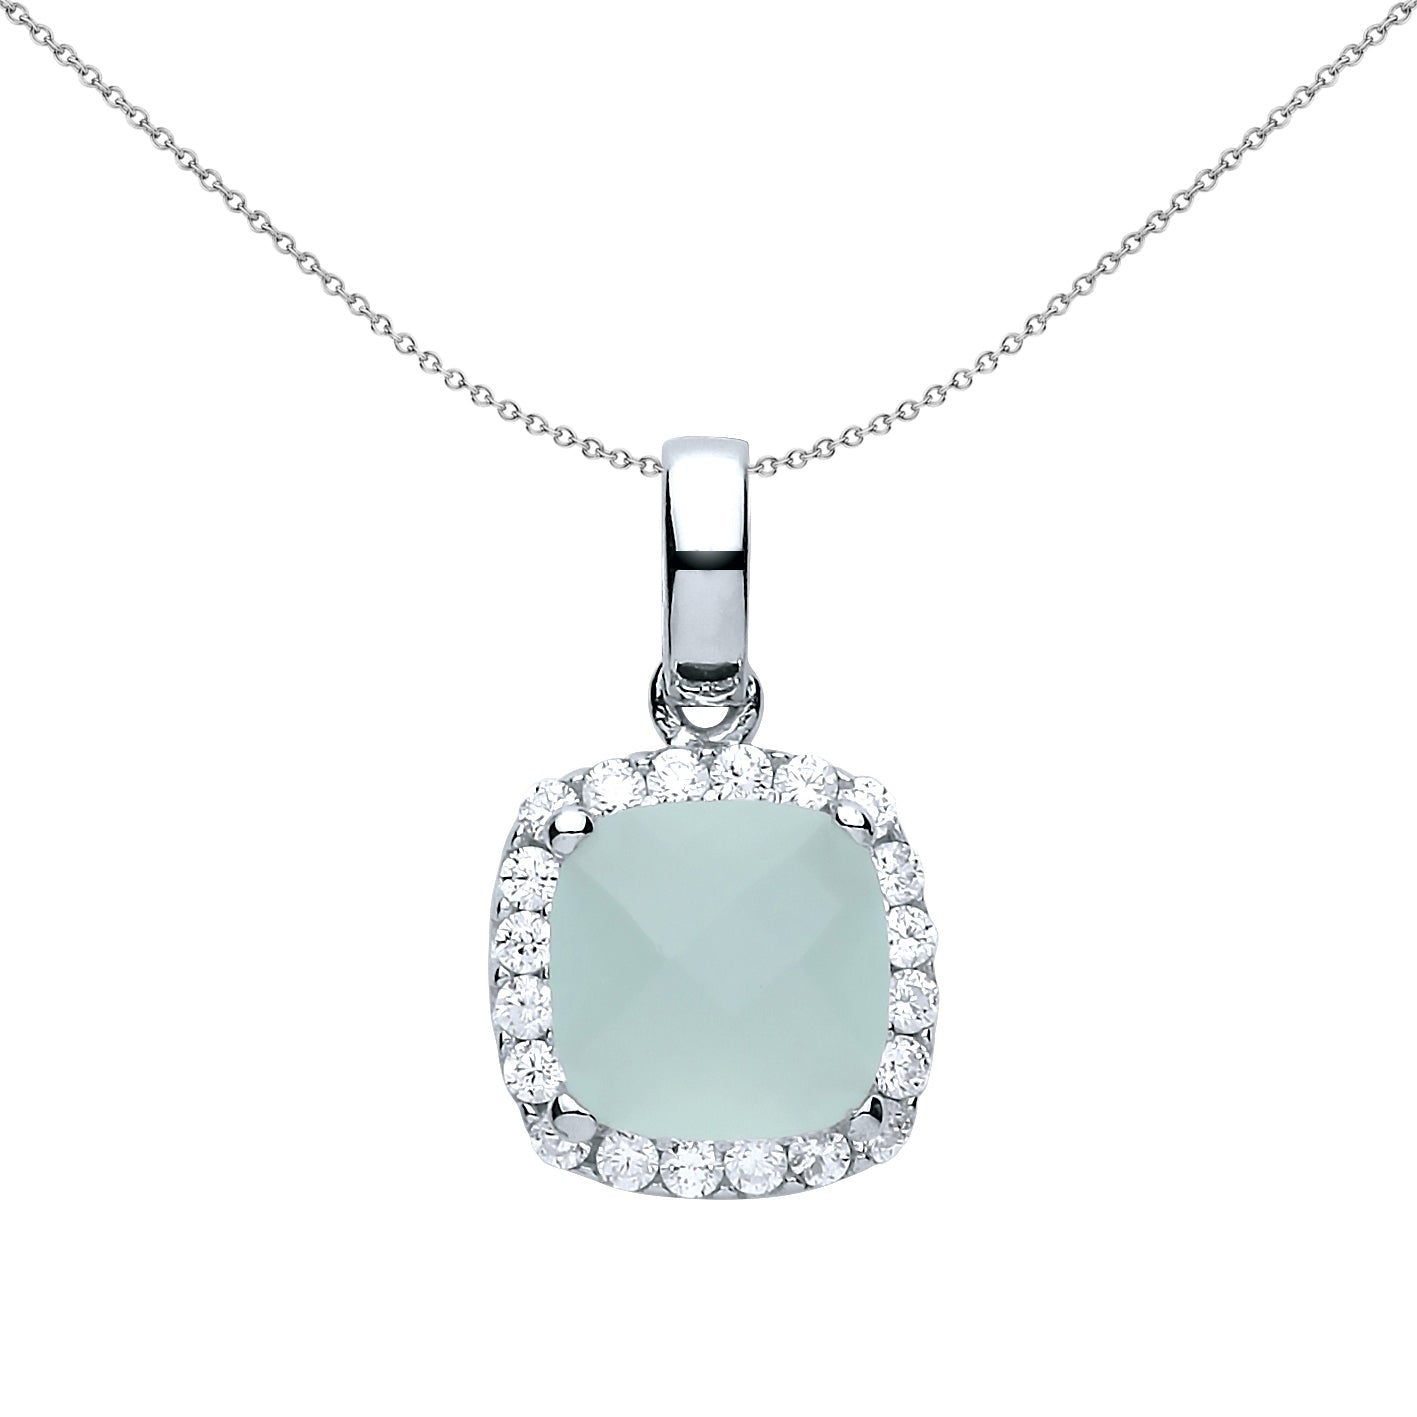 Silver  Square Cushion CZ cloudy opaque Charm Necklace 18 inch - GVP437MIL